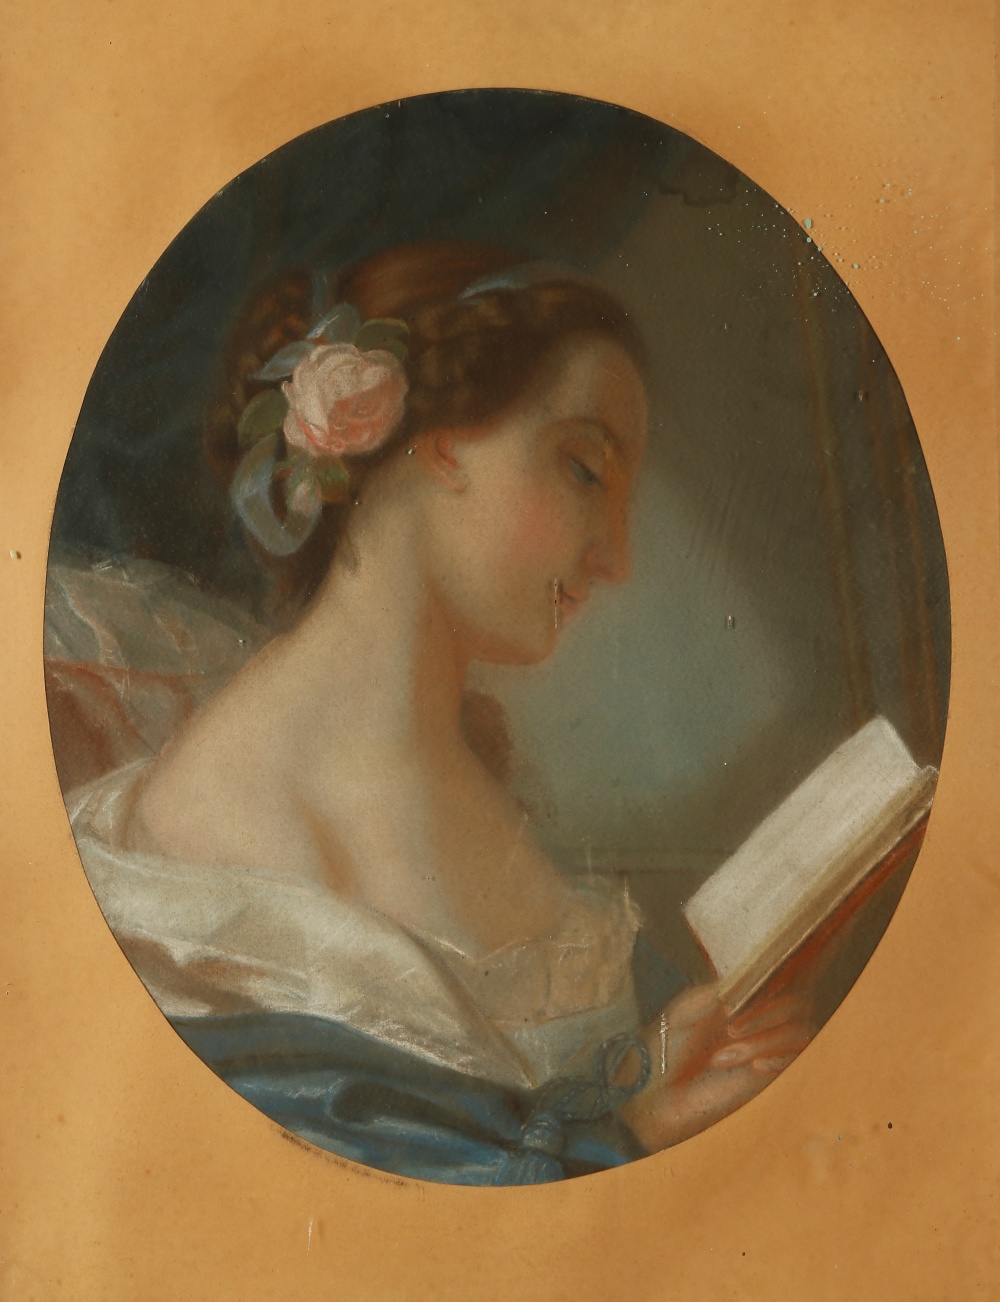 ENGLISH SCHOOL 19th century, A portrait of a young girl with flowers in her hair reading from a